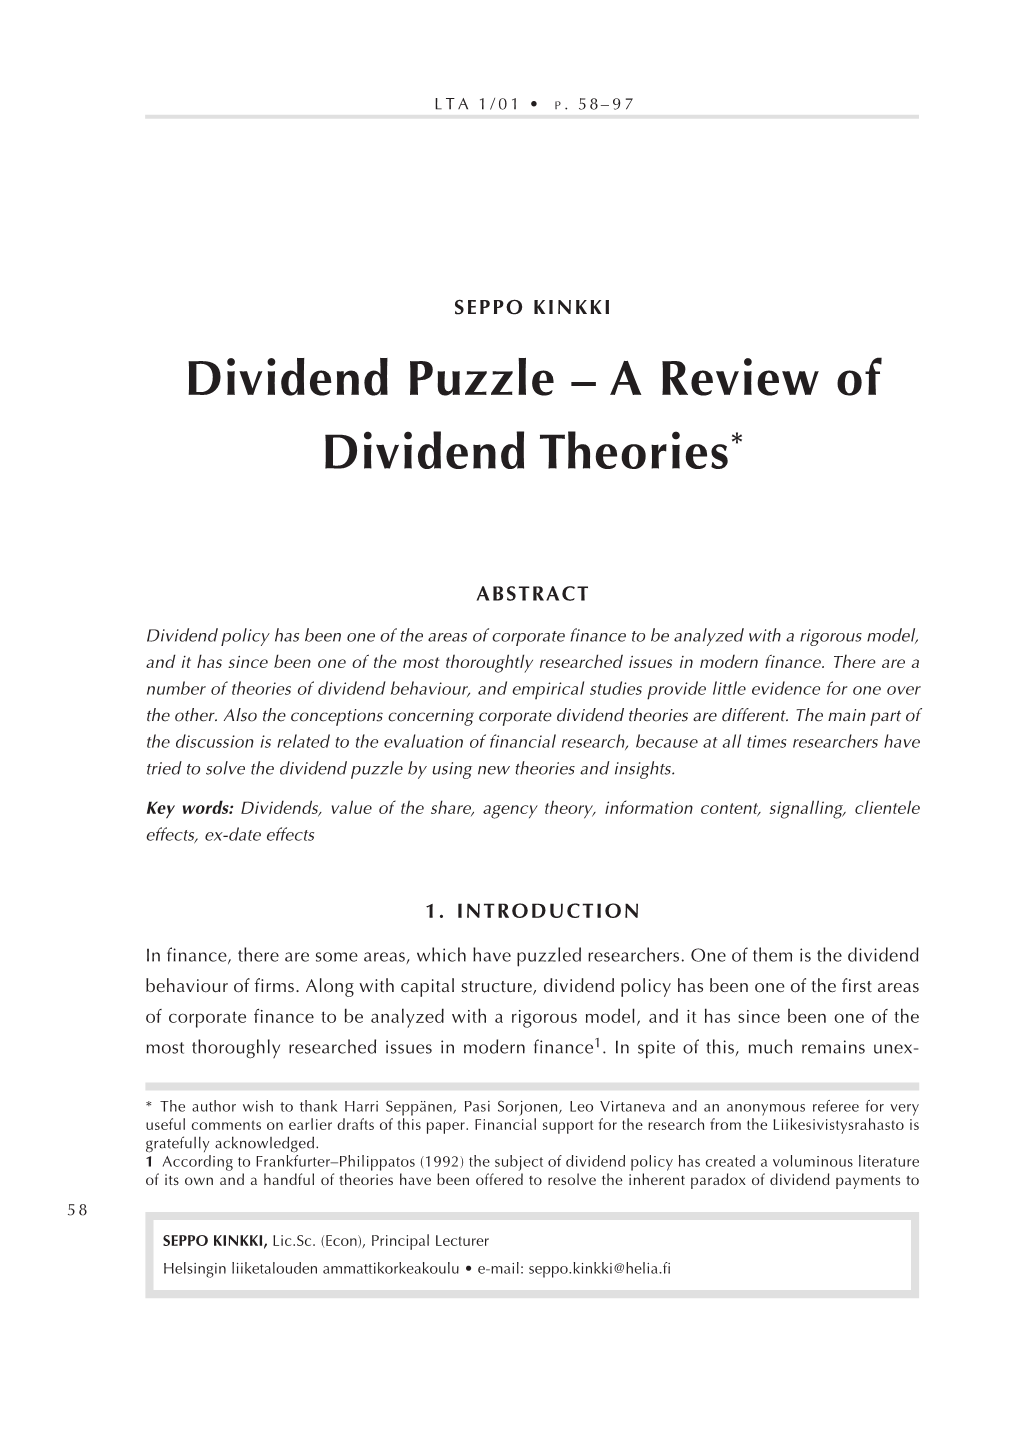 Dividend Puzzle – a Review of Dividend Theories*